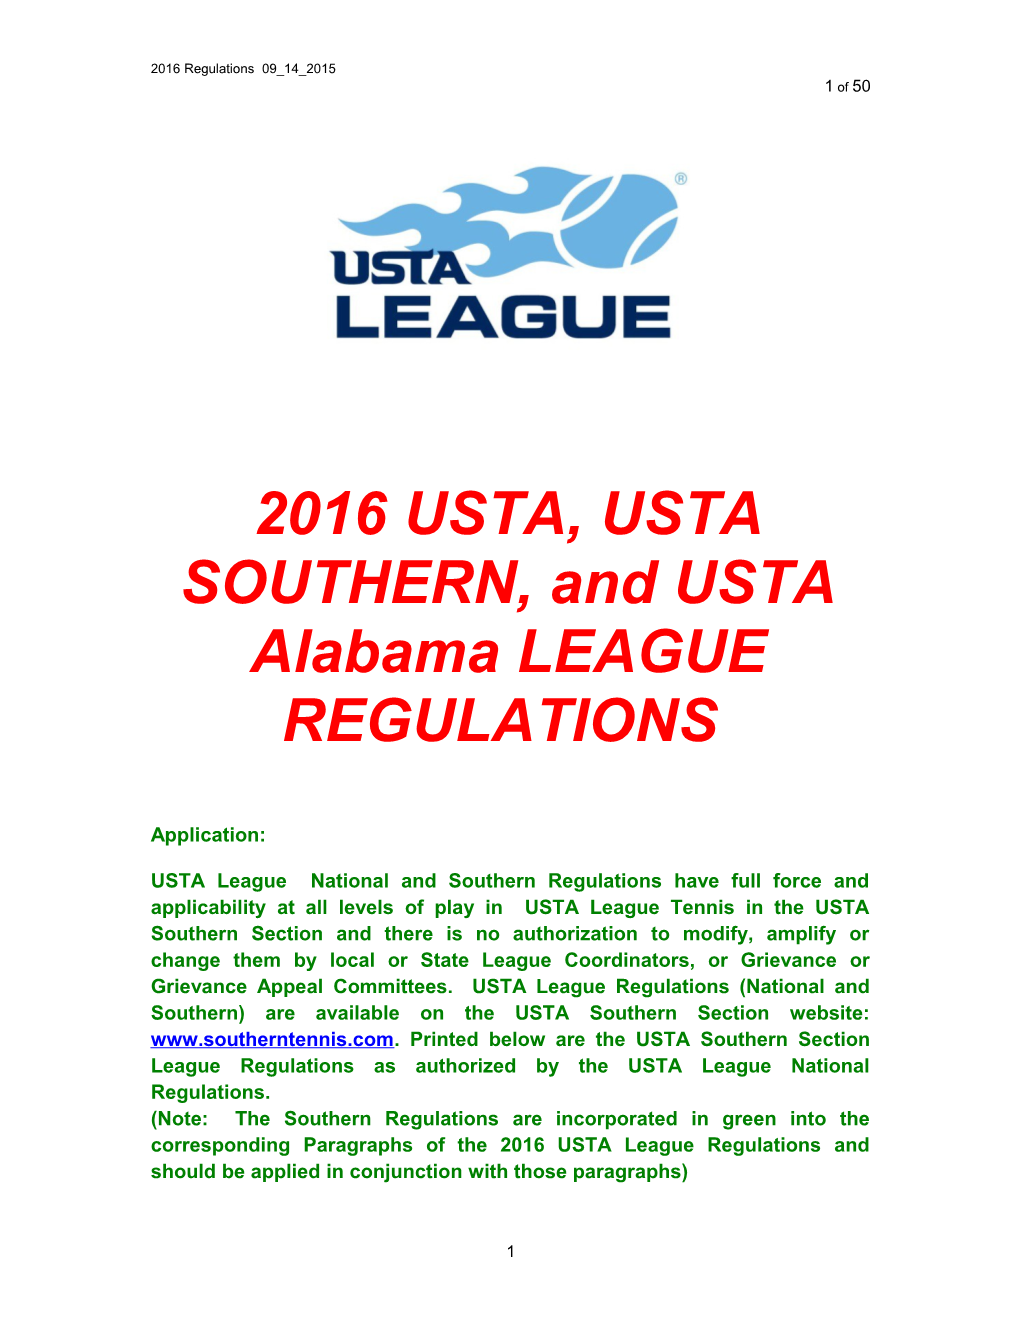 USTA League National and Southern Regulations Have Full Force and Applicability at All